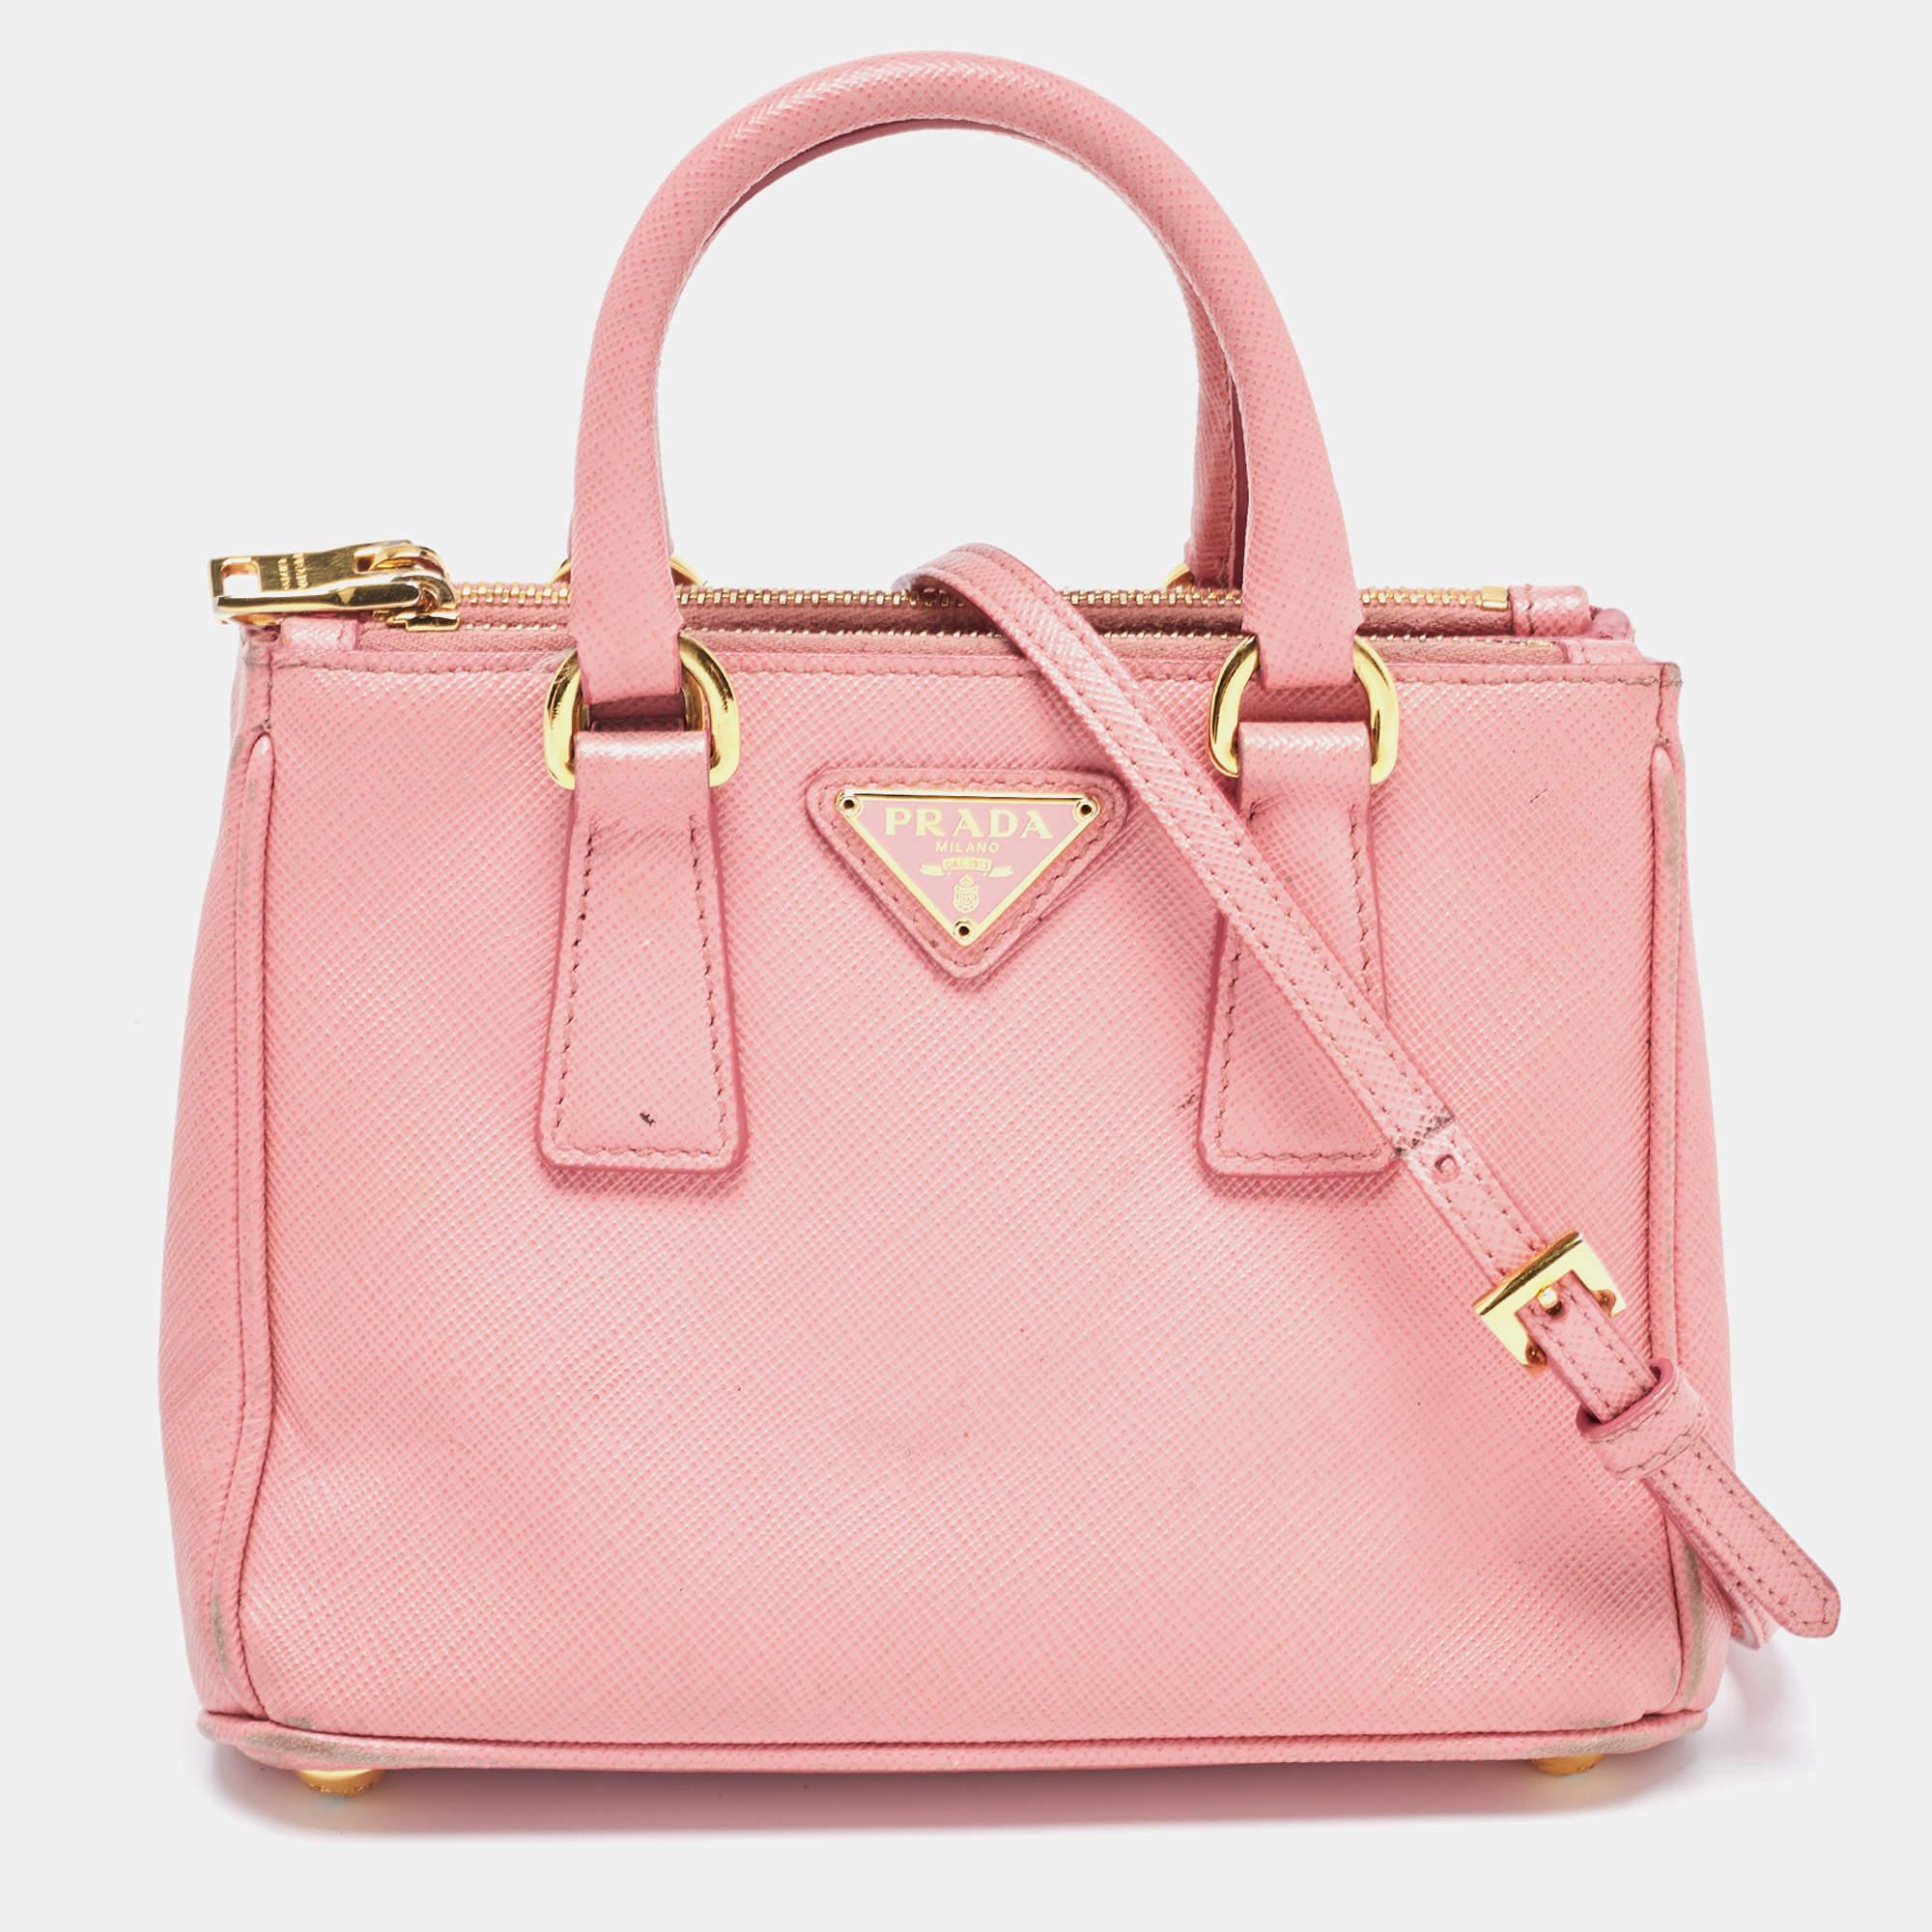 This Prada pink tote is an example of the brand's fine designs that are skillfully crafted to project a classic charm. It is a functional creation with an elevating appeal.

Includes: Detachable Strap